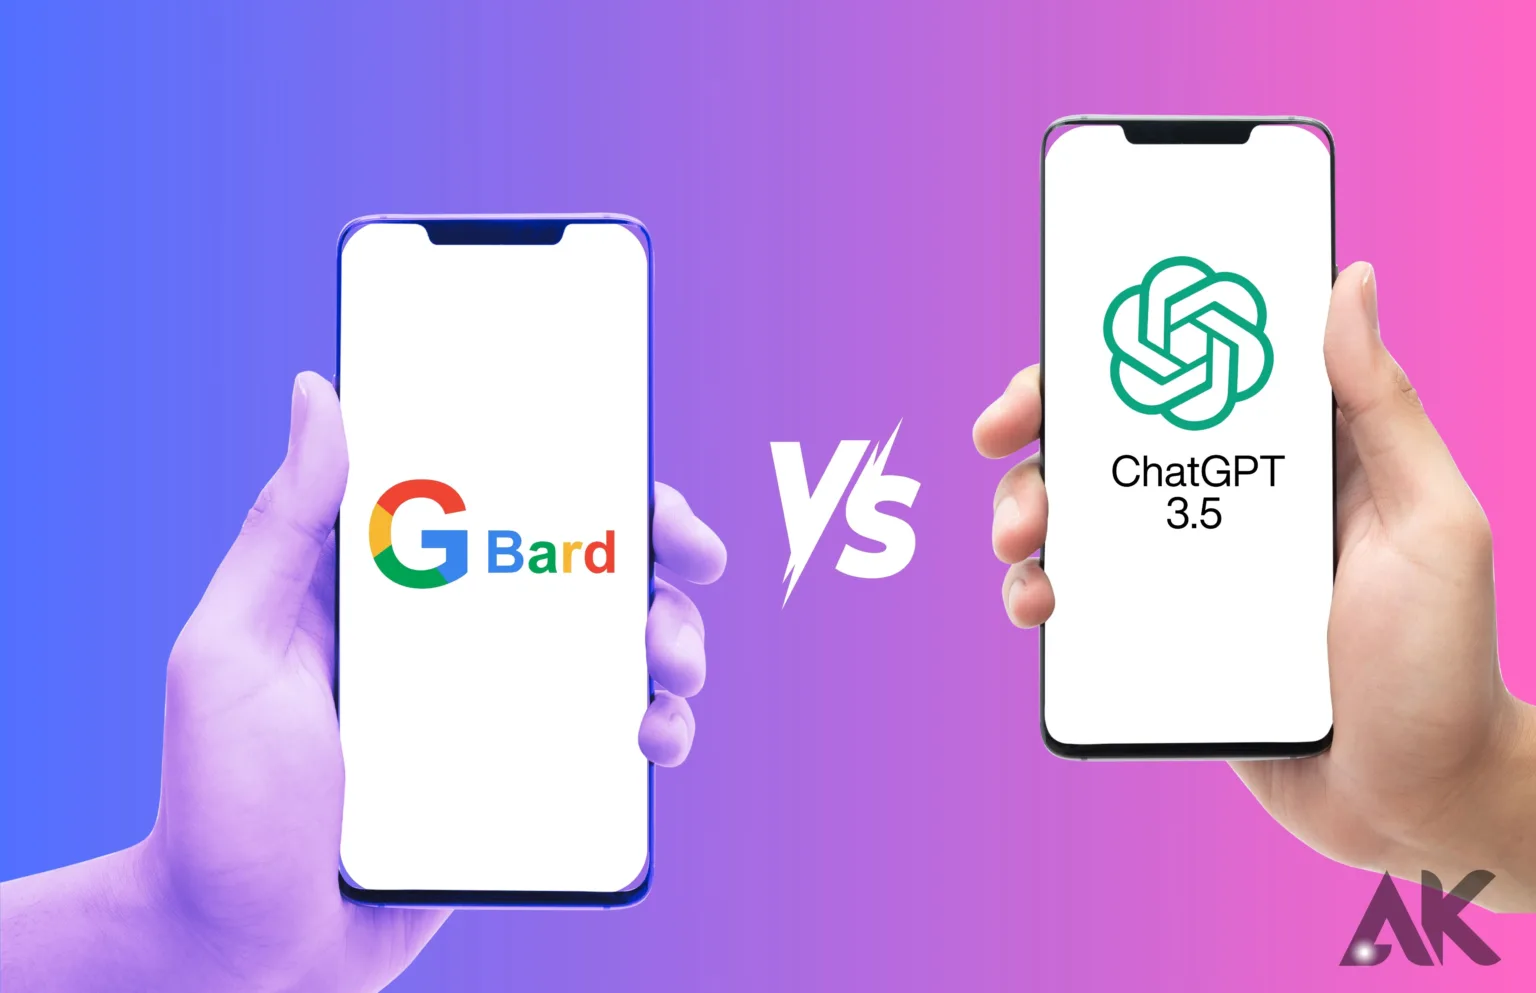 Google Bard vs ChatGPT 3.5: What's the Difference?